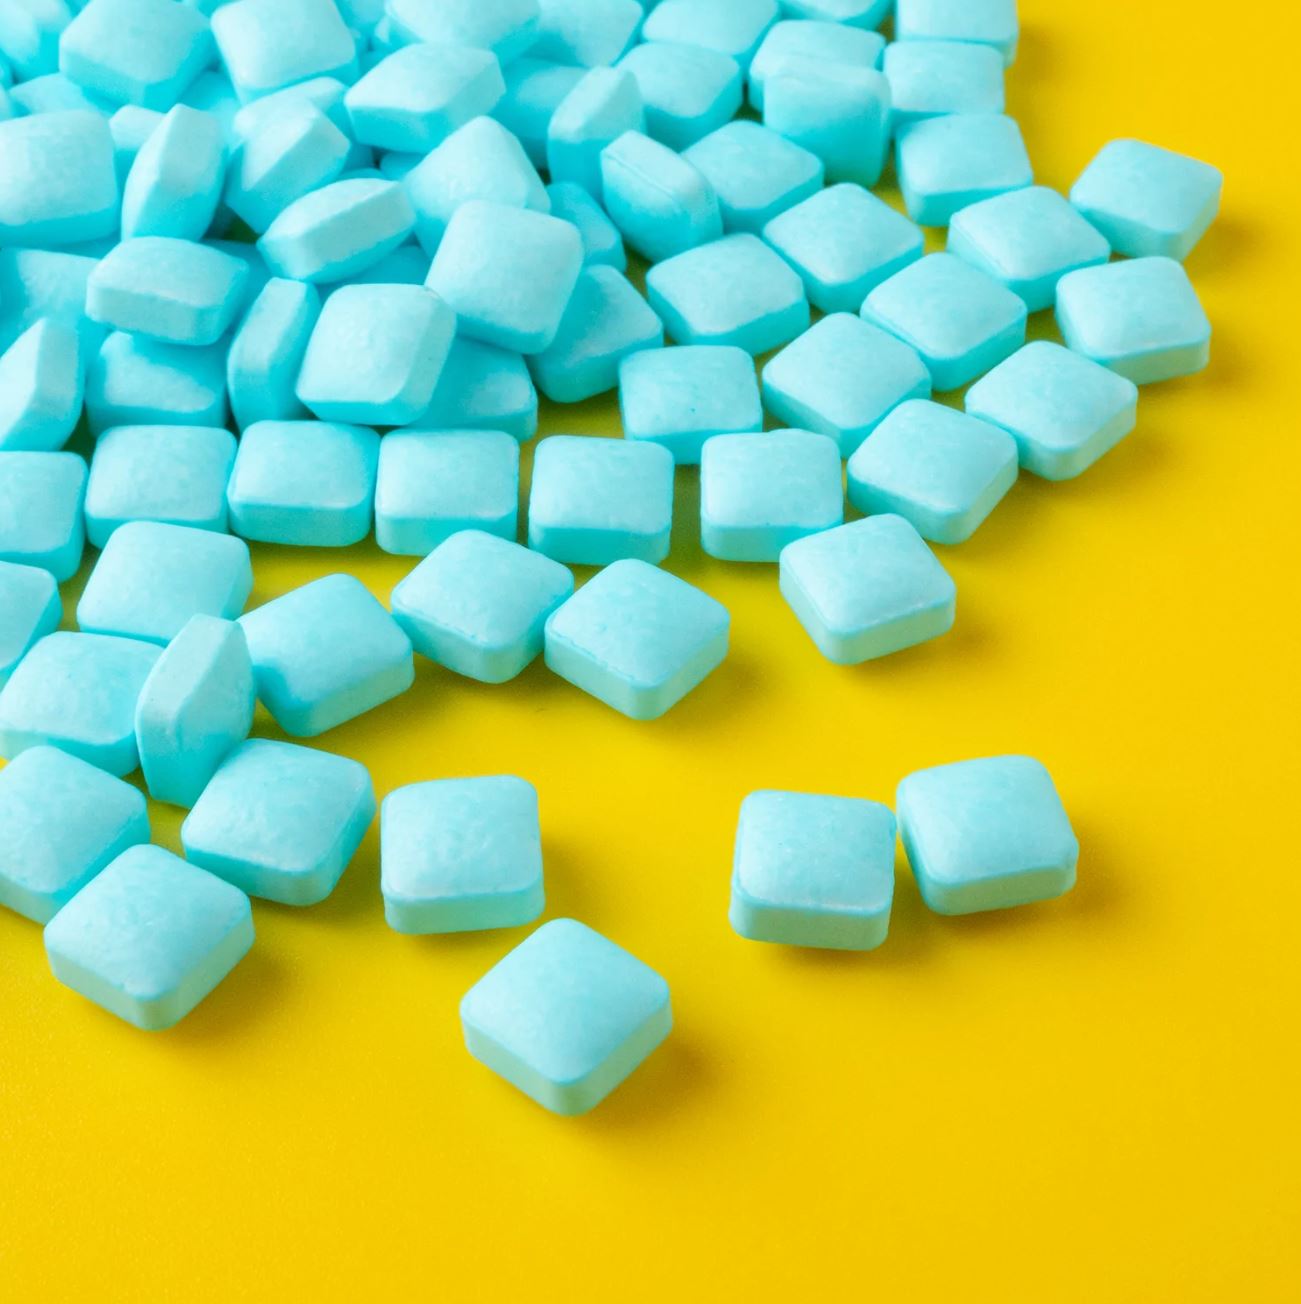 Blue Square Candy Topping